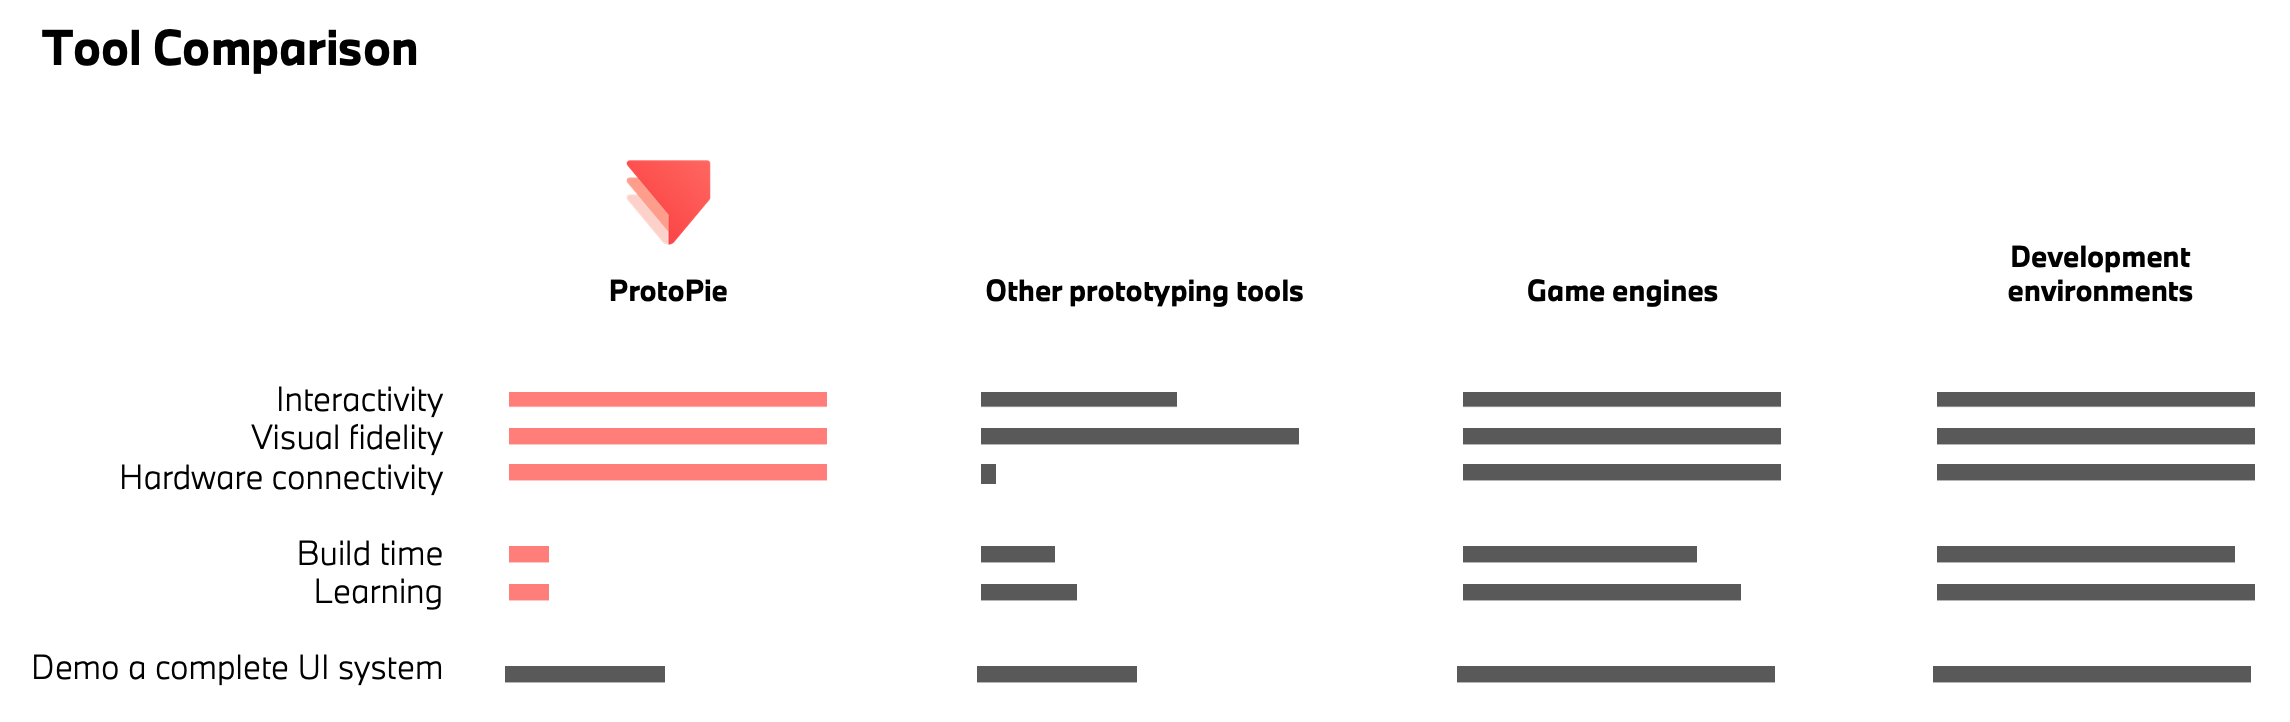 prototyping tools comparison by BMW